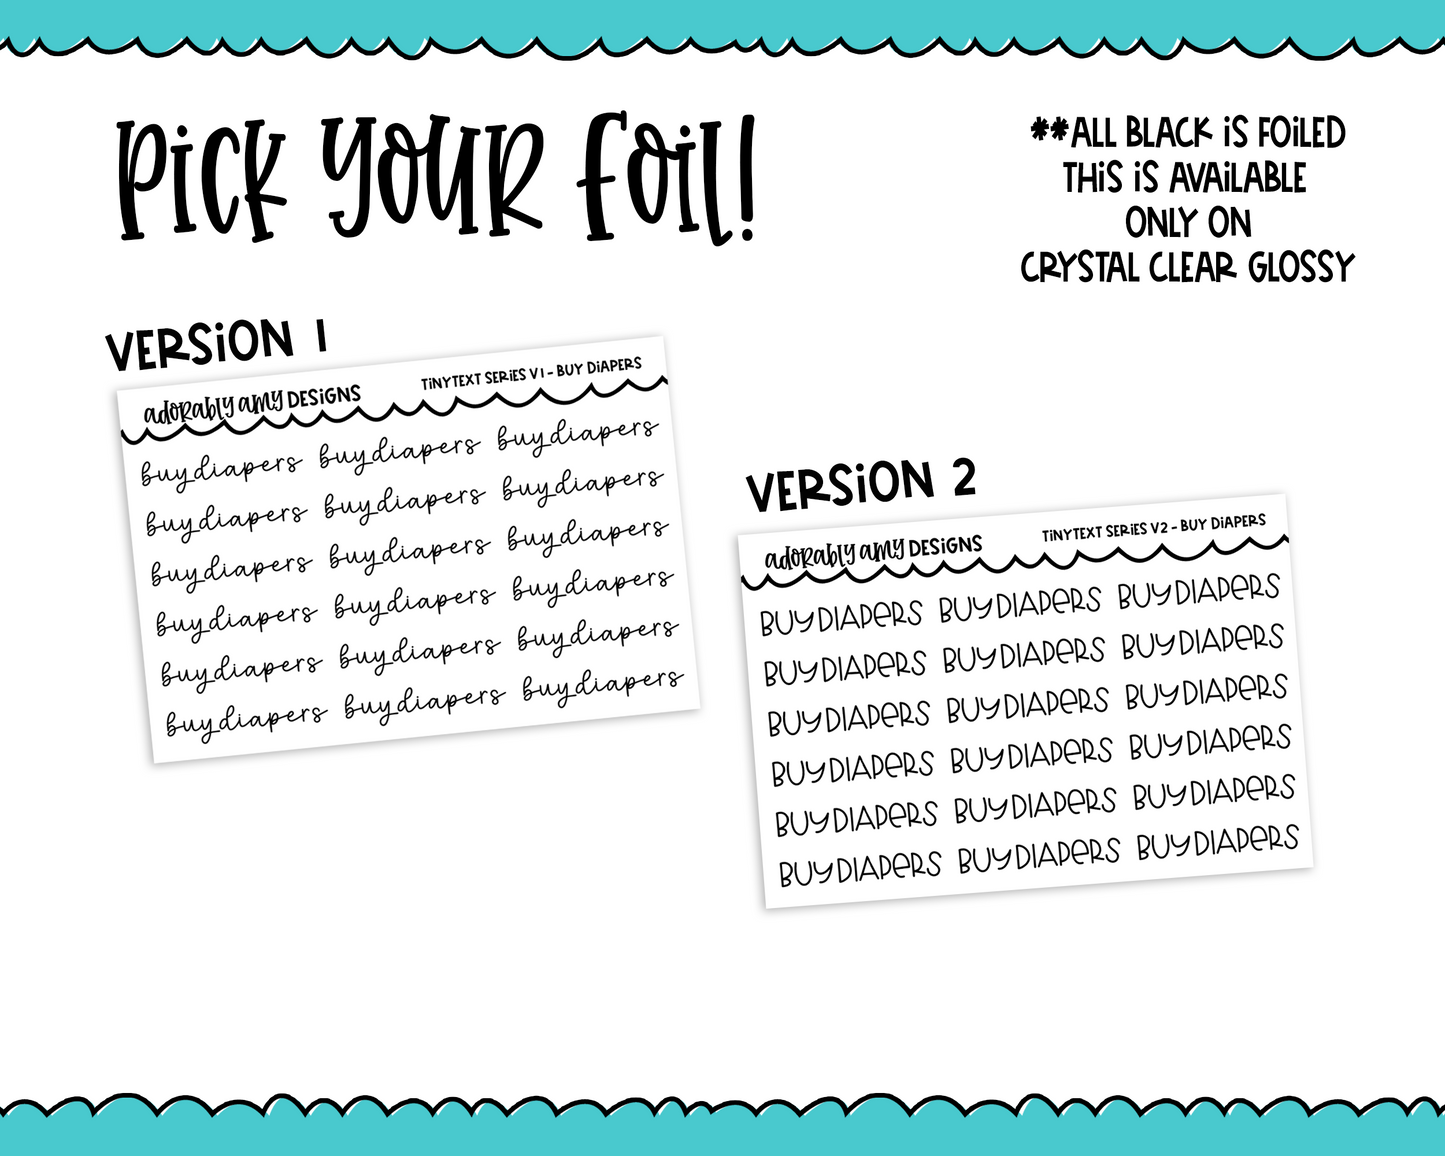 Foiled Tiny Text Series - Buy Diapers Checklist Size Planner Stickers for any Planner or Insert